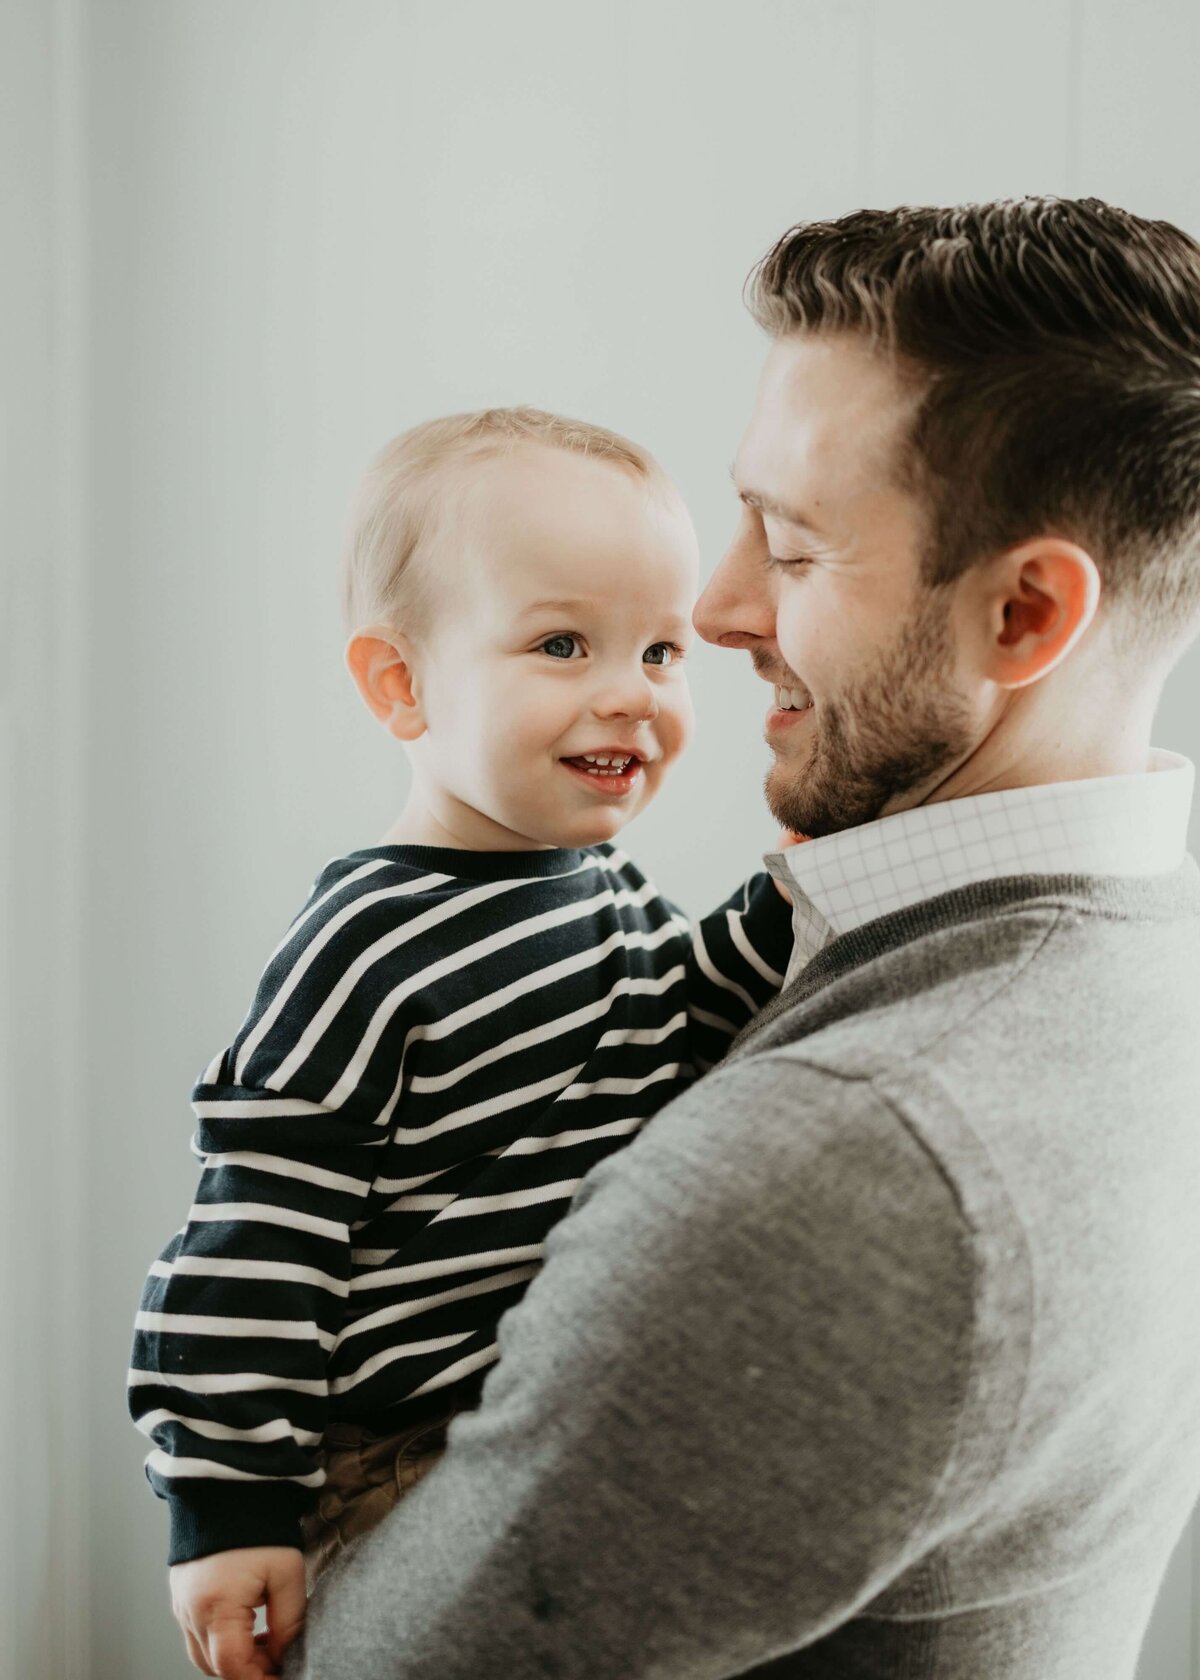 A Pittsburgh family photographer captures a man holding a baby boy in front of a white wall.